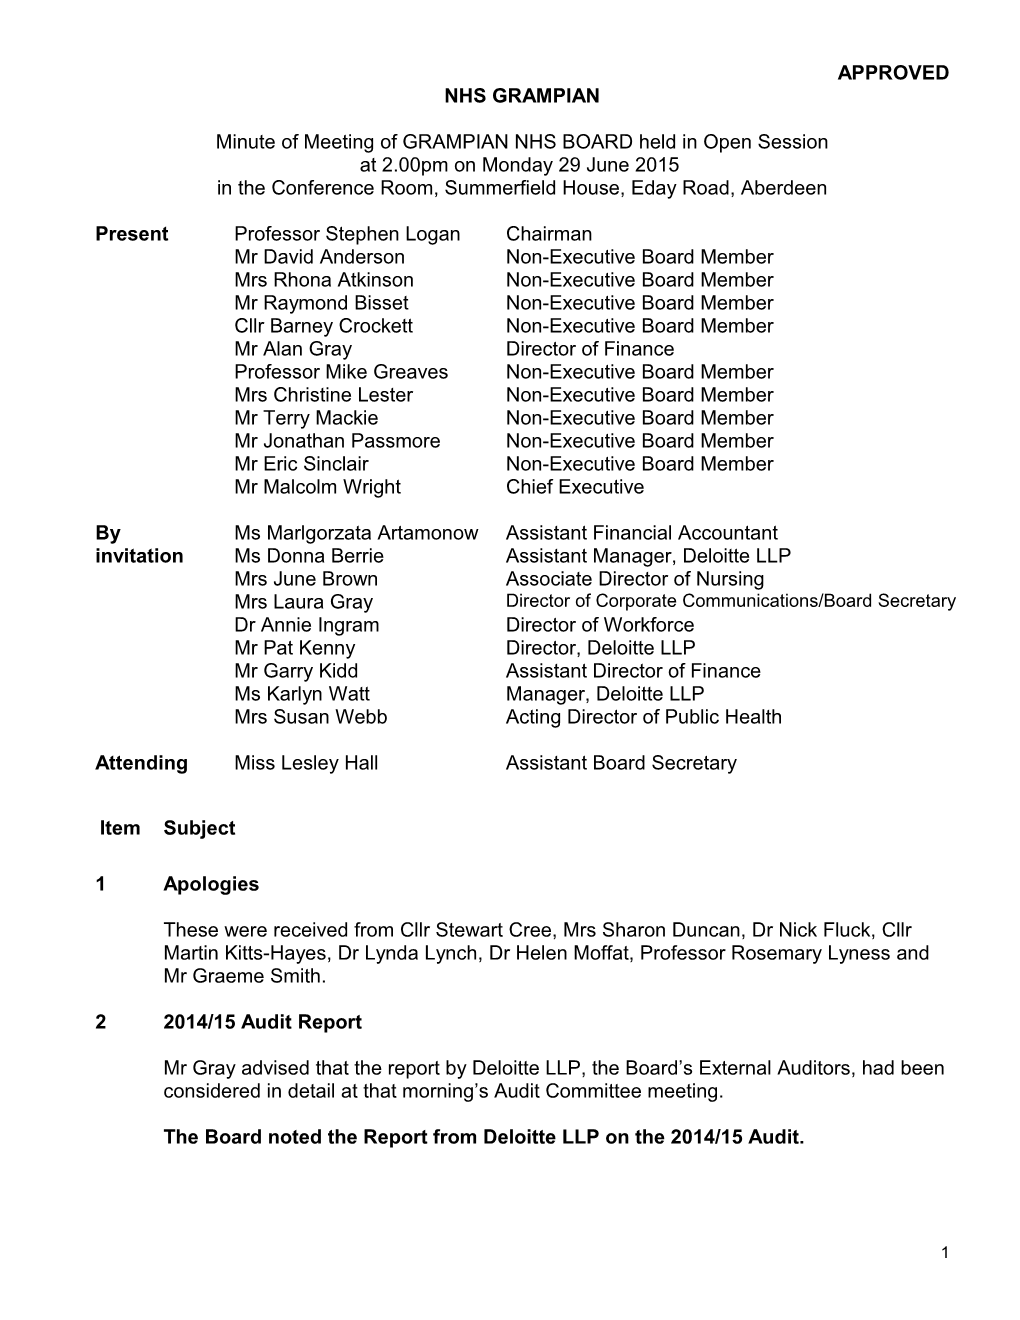 Approved Board Minute 29 June